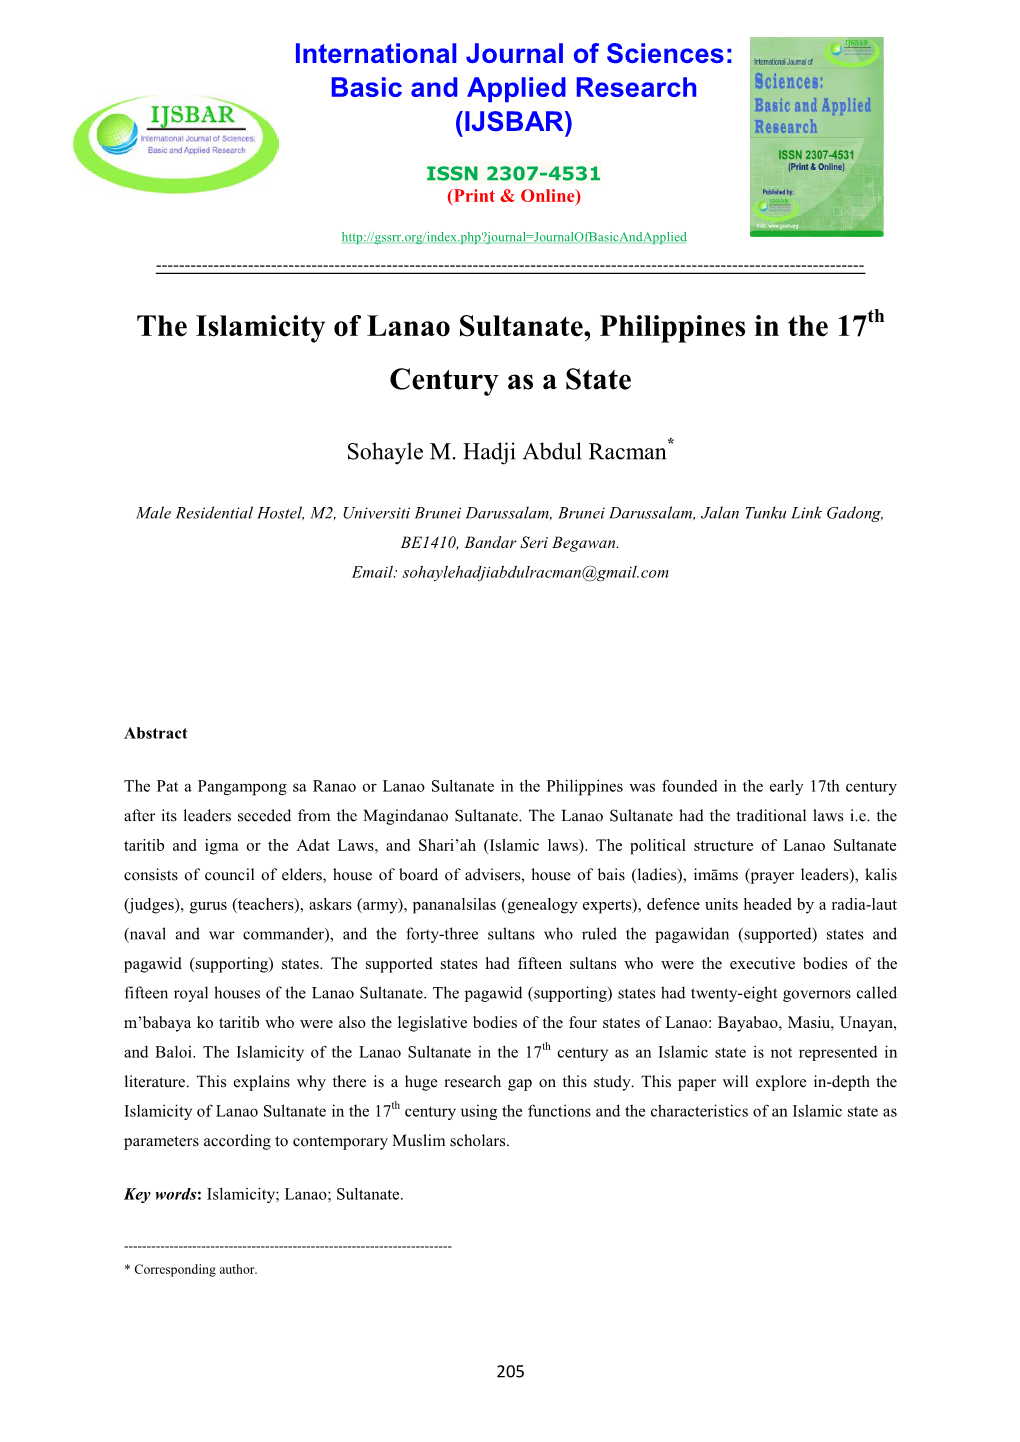 The Islamicity of Lanao Sultanate, Philippines in the 17 Century As A